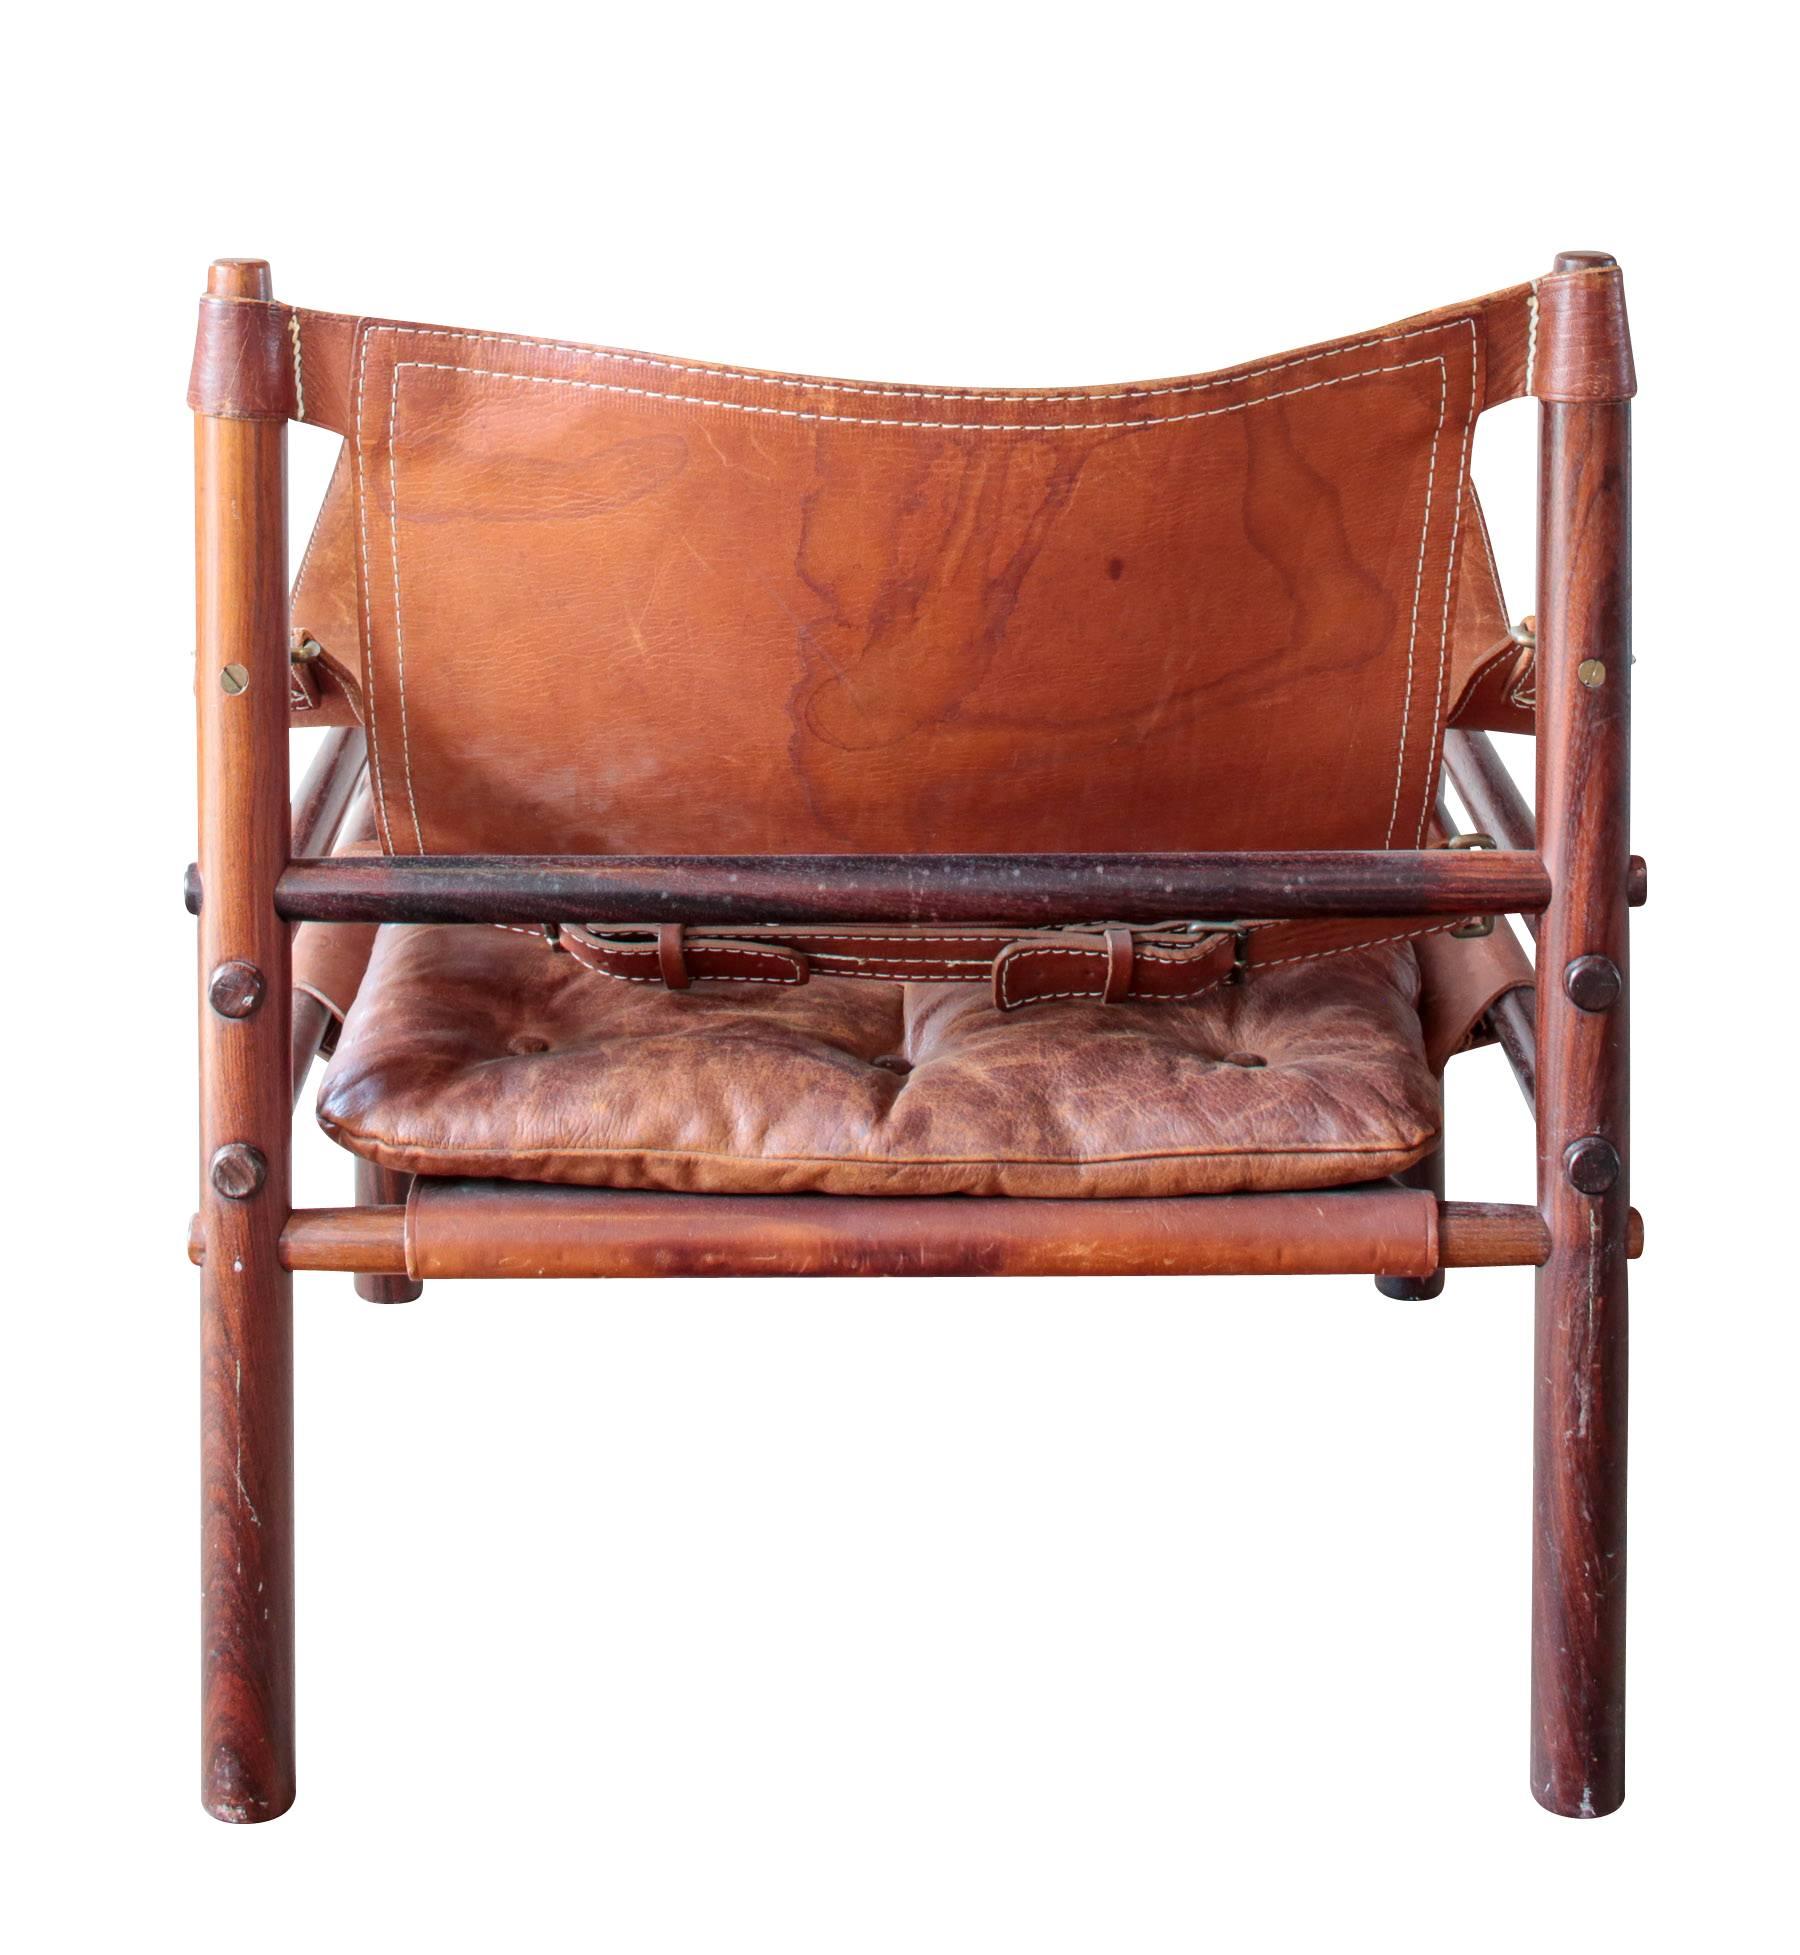 Inspired by Kaare Klint's iconic Safari chair, Arne Norell created the Sirroco Safari chair in 1964. This chair is lightweight and collapsible. It is held together by leather support straps and accentuated with buckles in the back.